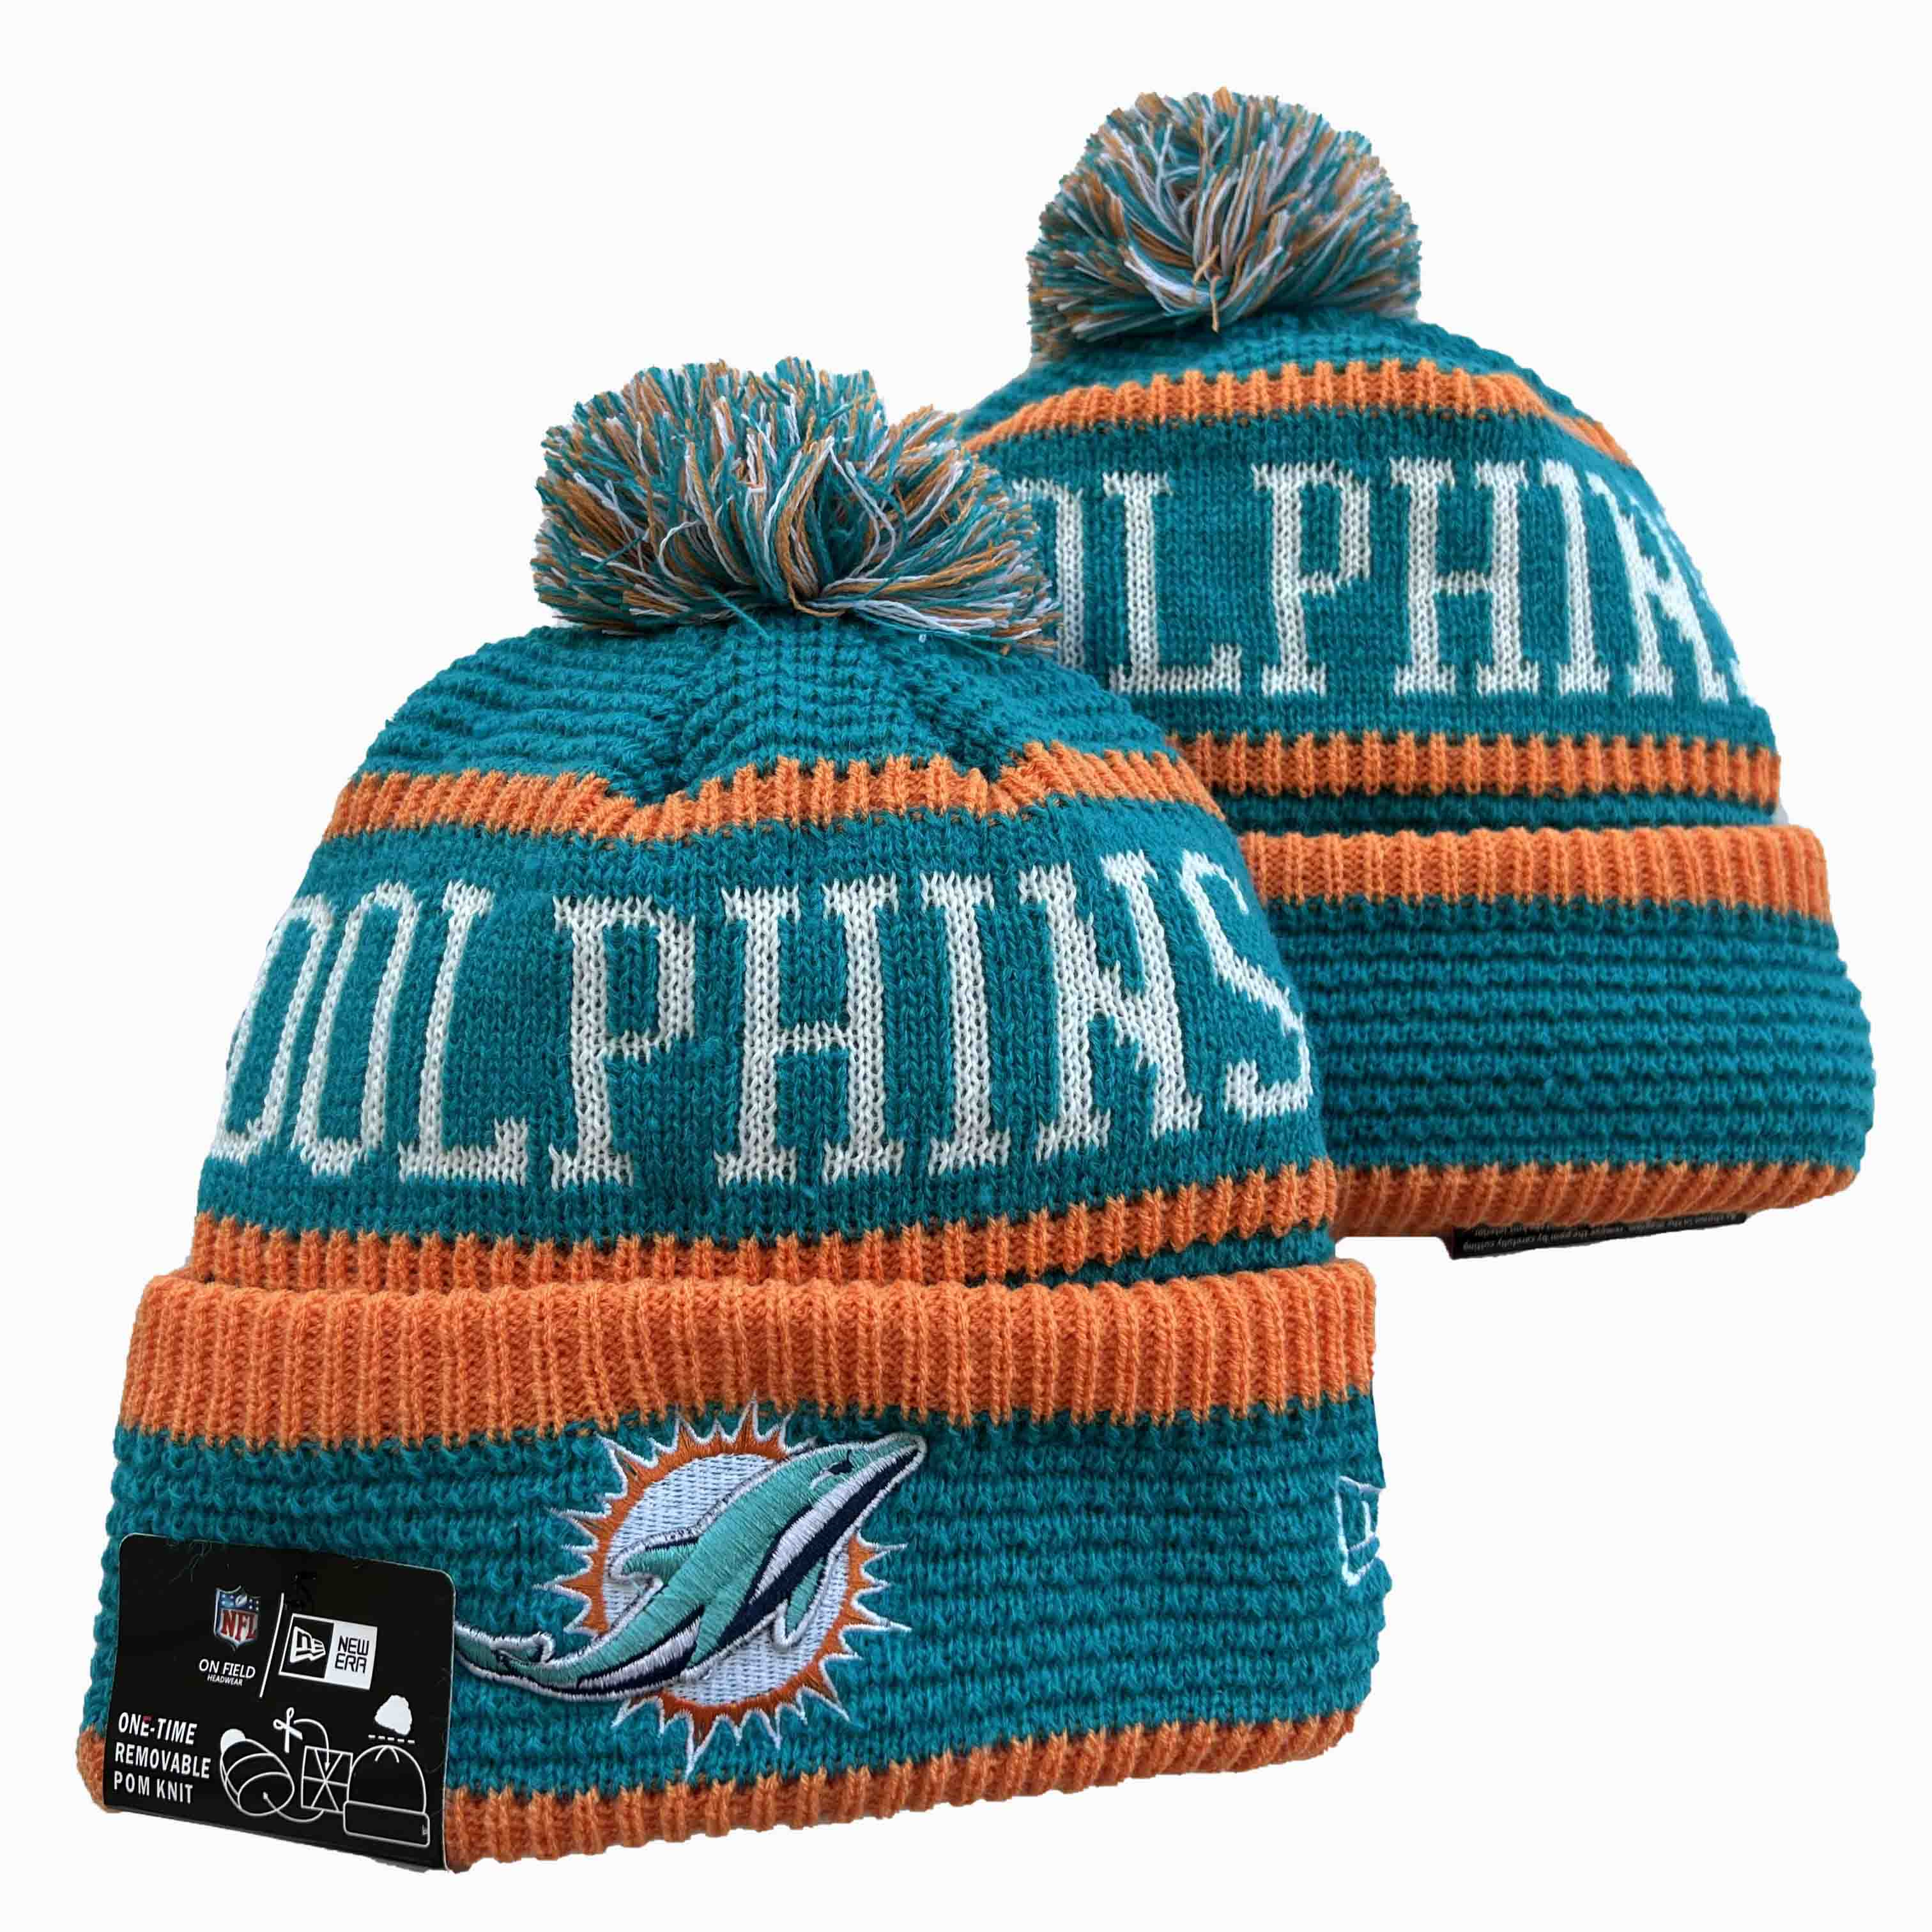 Miami Dolphins Knit Hats 0012